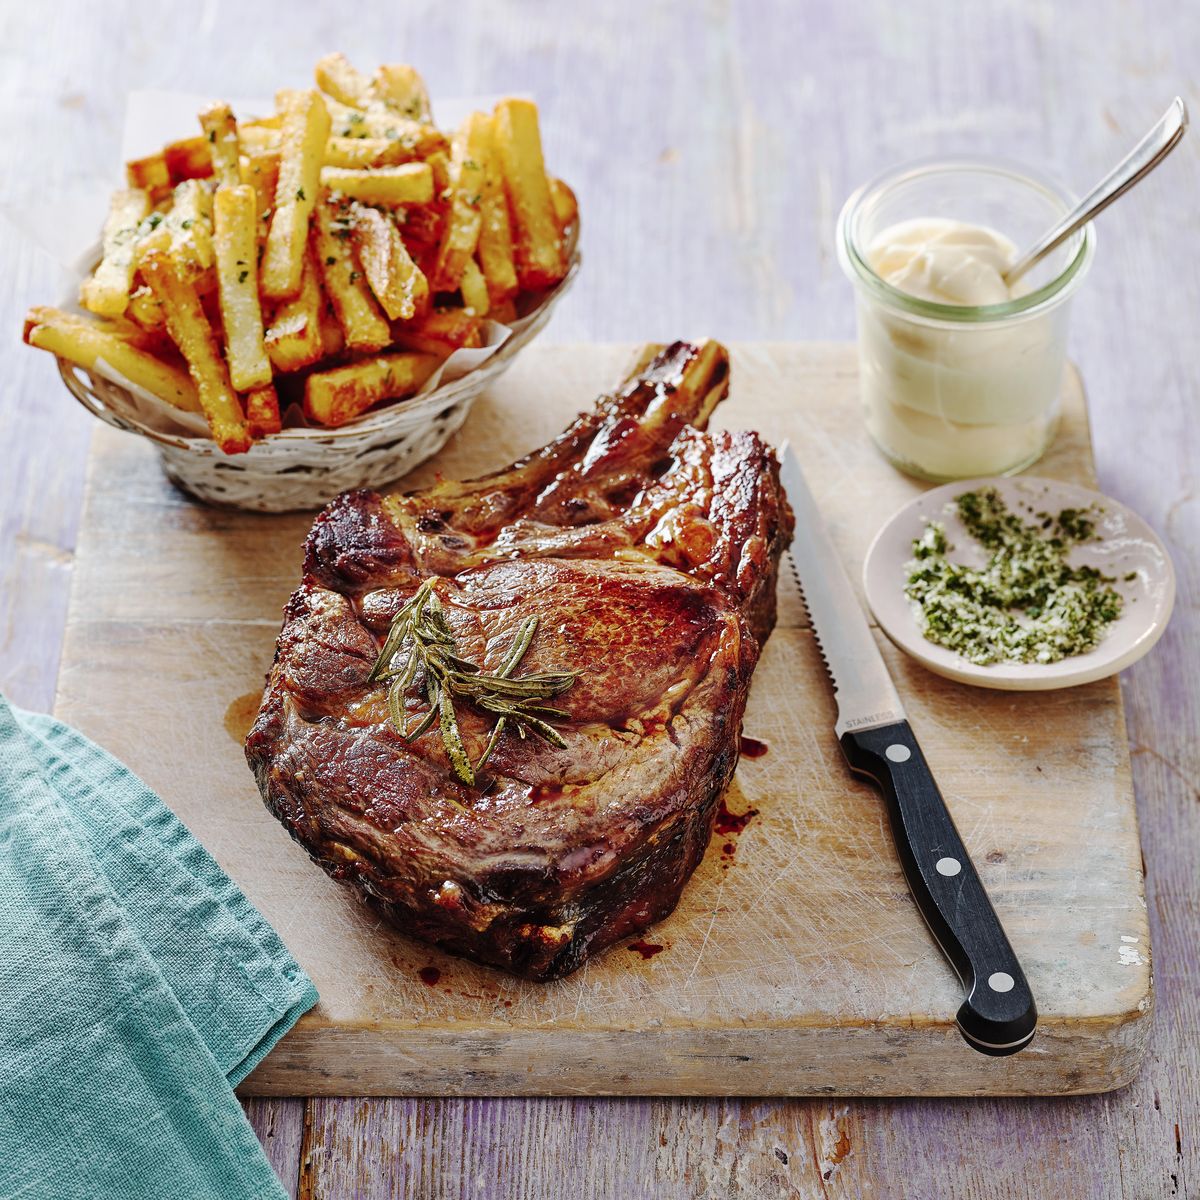 https://hips.hearstapps.com/hmg-prod/images/cote-de-boeuf-with-rosemary-salt-fries-and-truffle-mayo-1657809619.jpg?crop=1.00xw:1.00xh;0,0&resize=1200:*